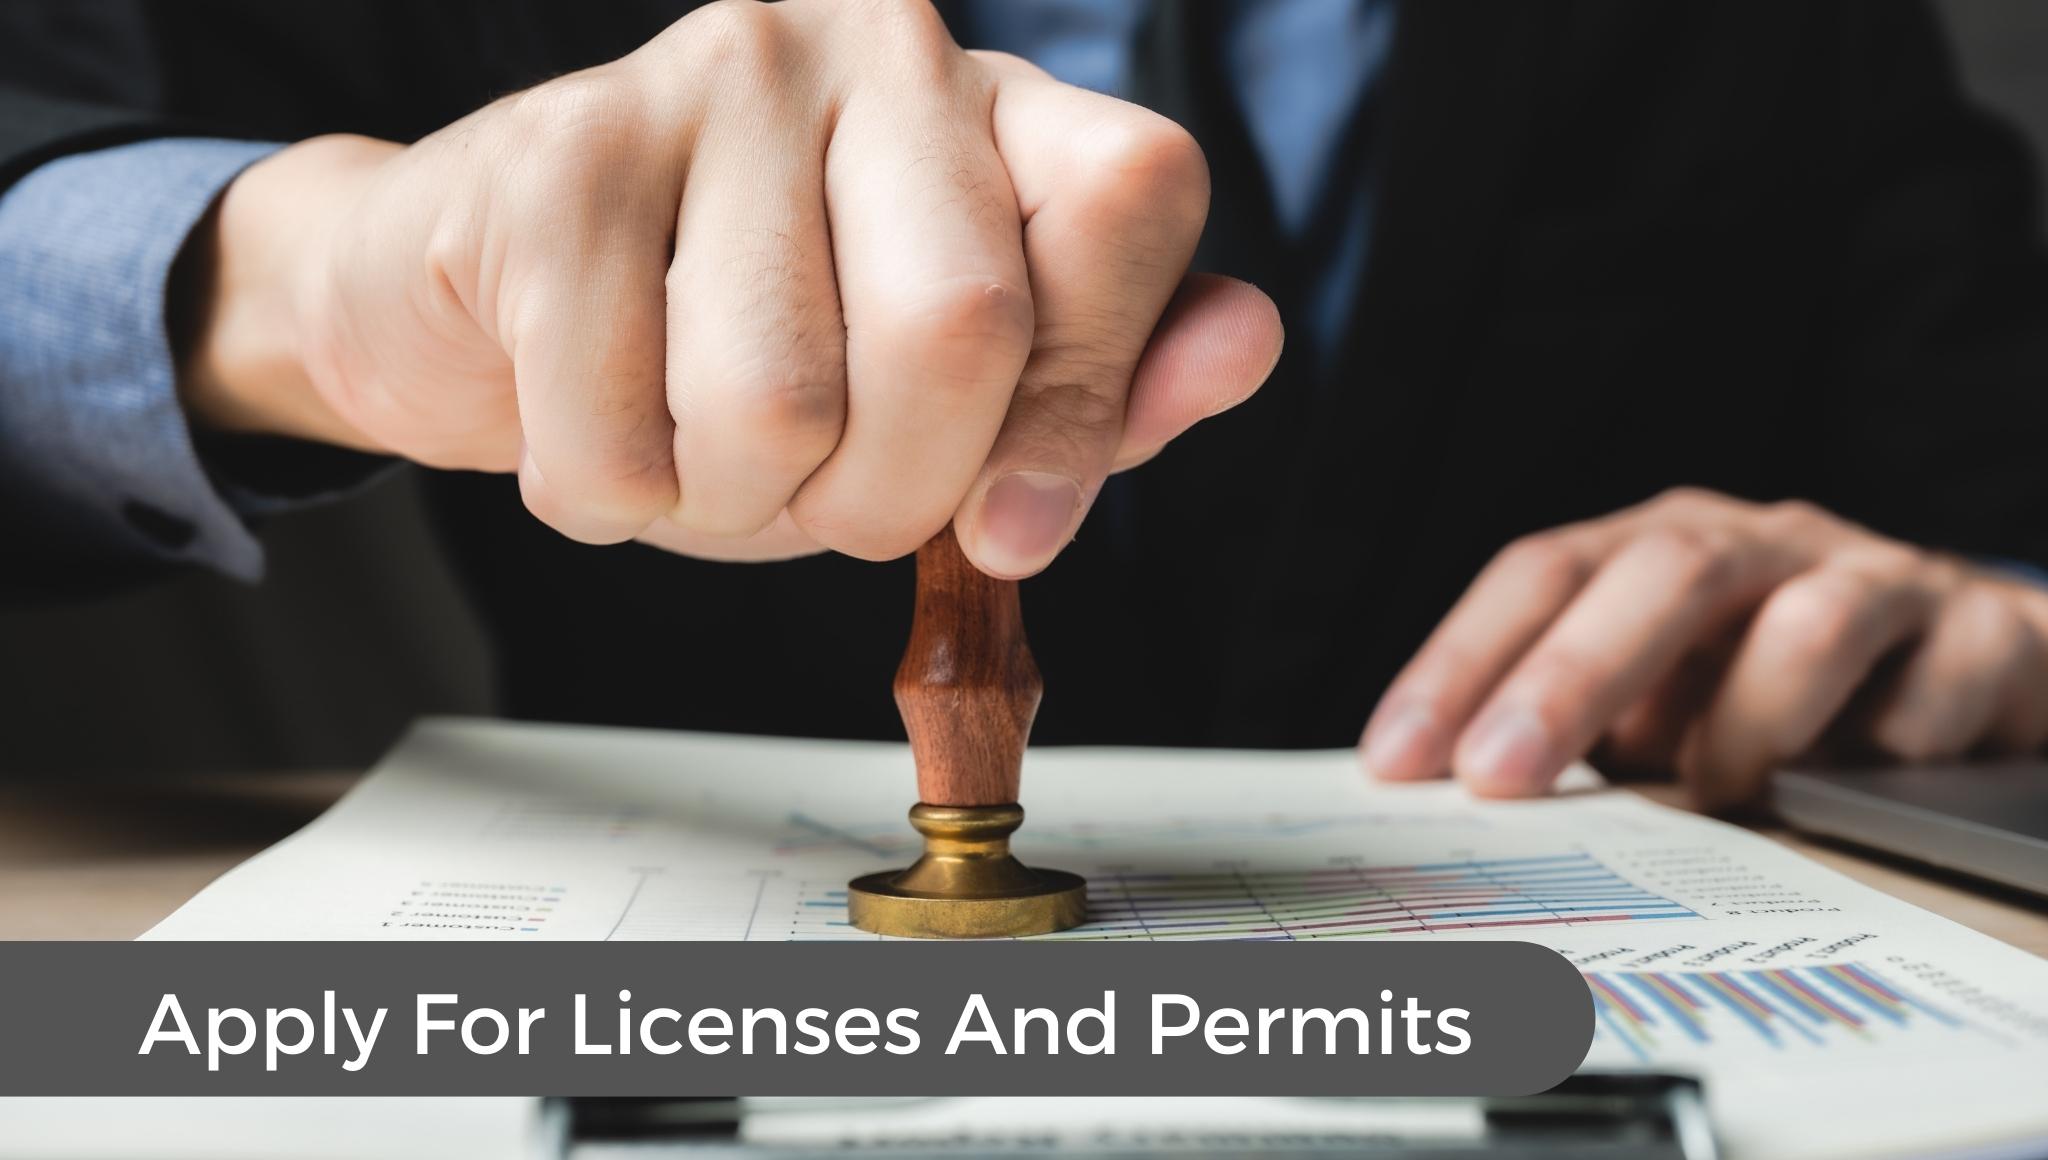 Apply for licenses and permits